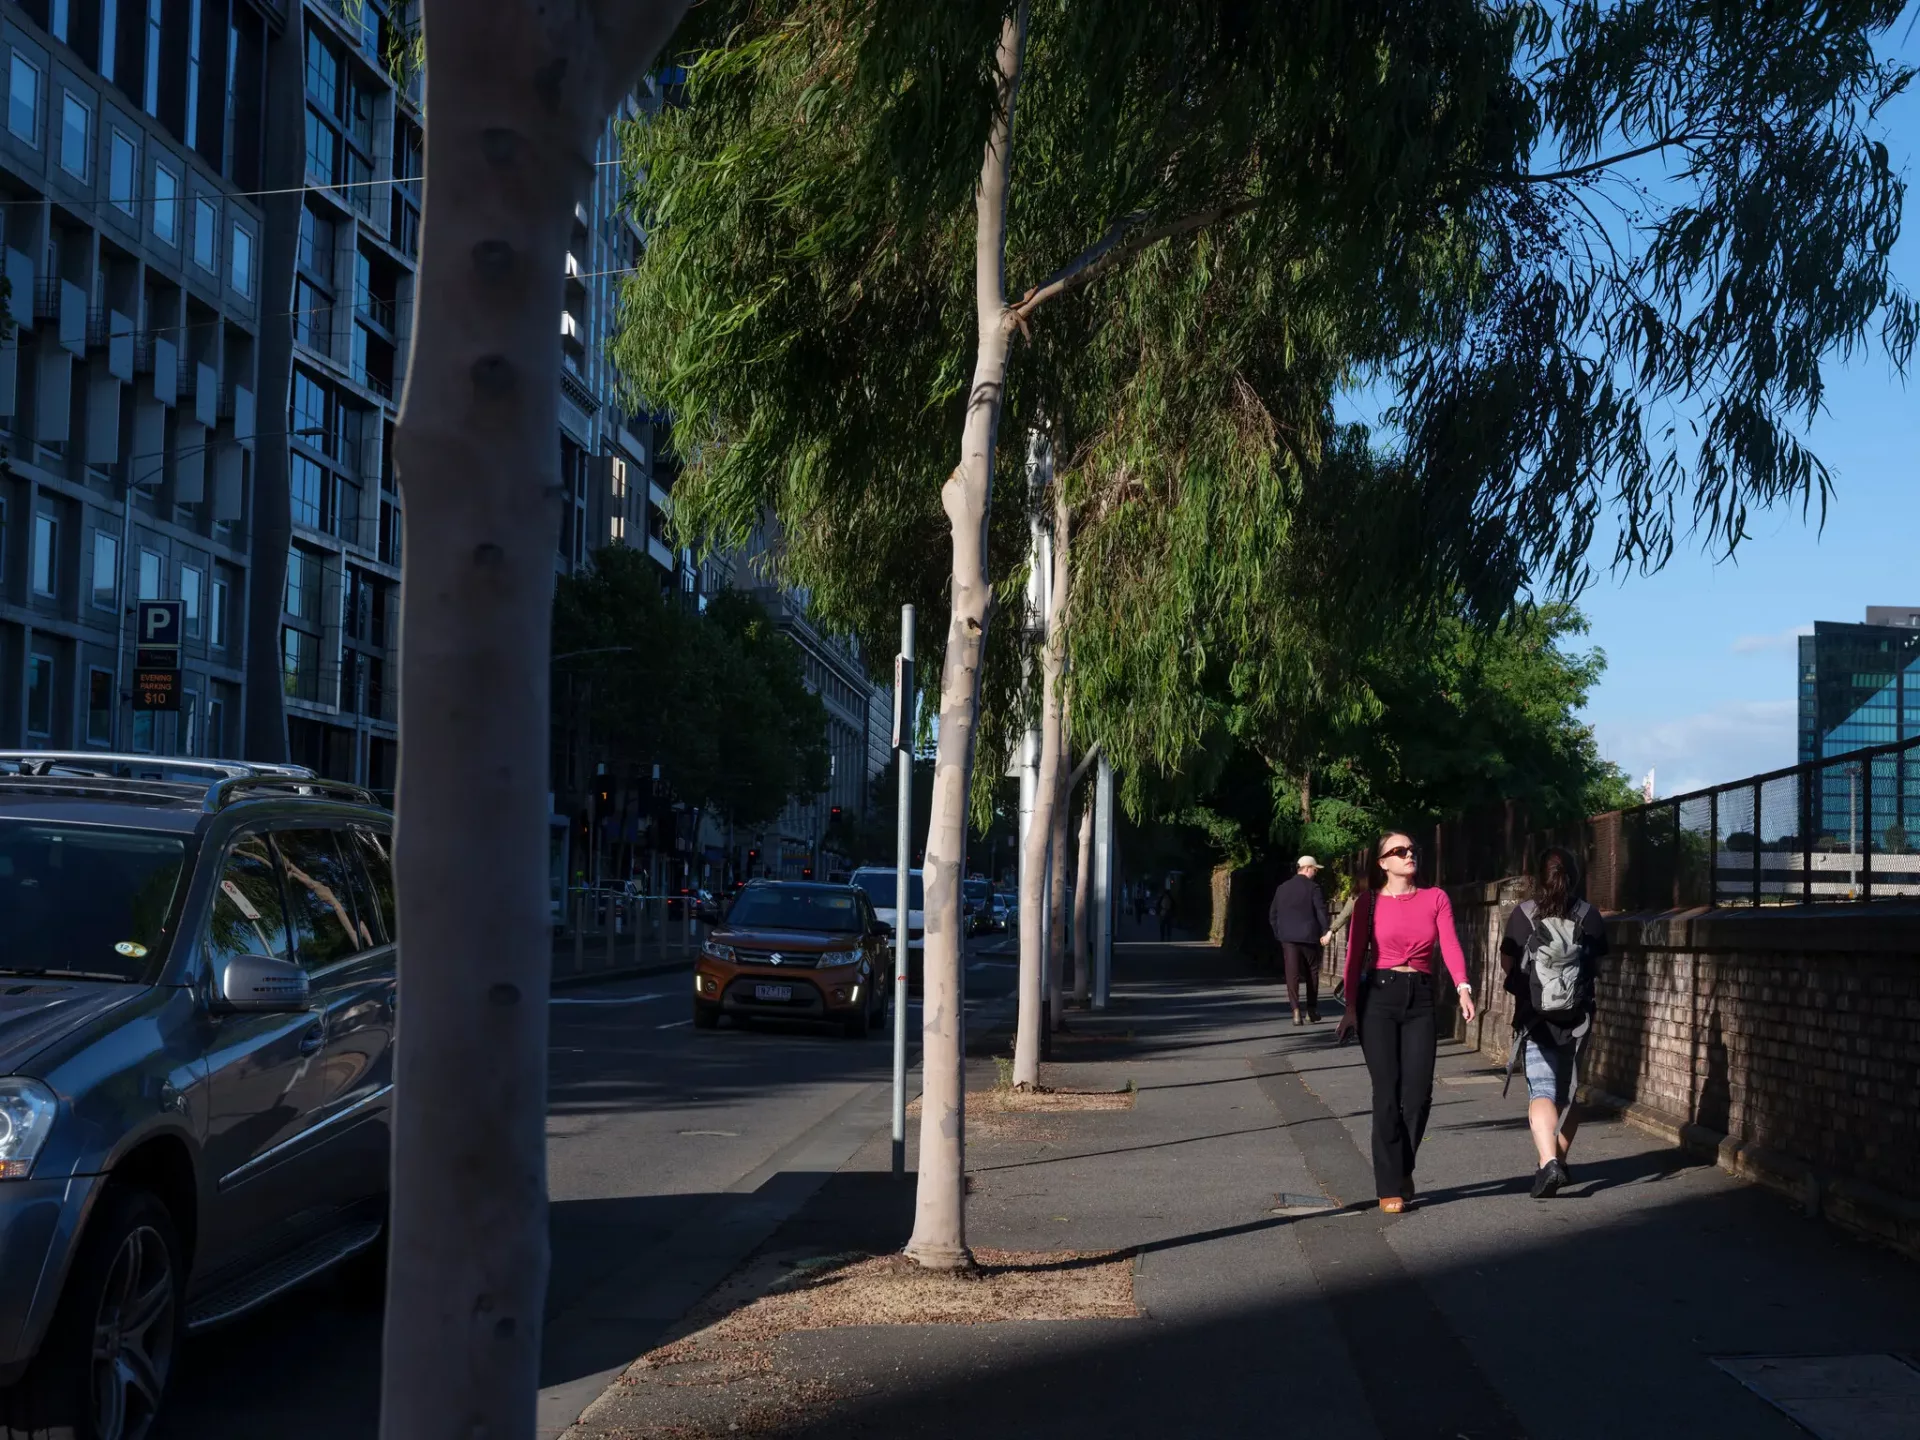 Lemon-scented gum trees were planted in 2016 along Flinders Street, on the edge of Melbourne's central business district. The native trees replaced  mature London plane trees.